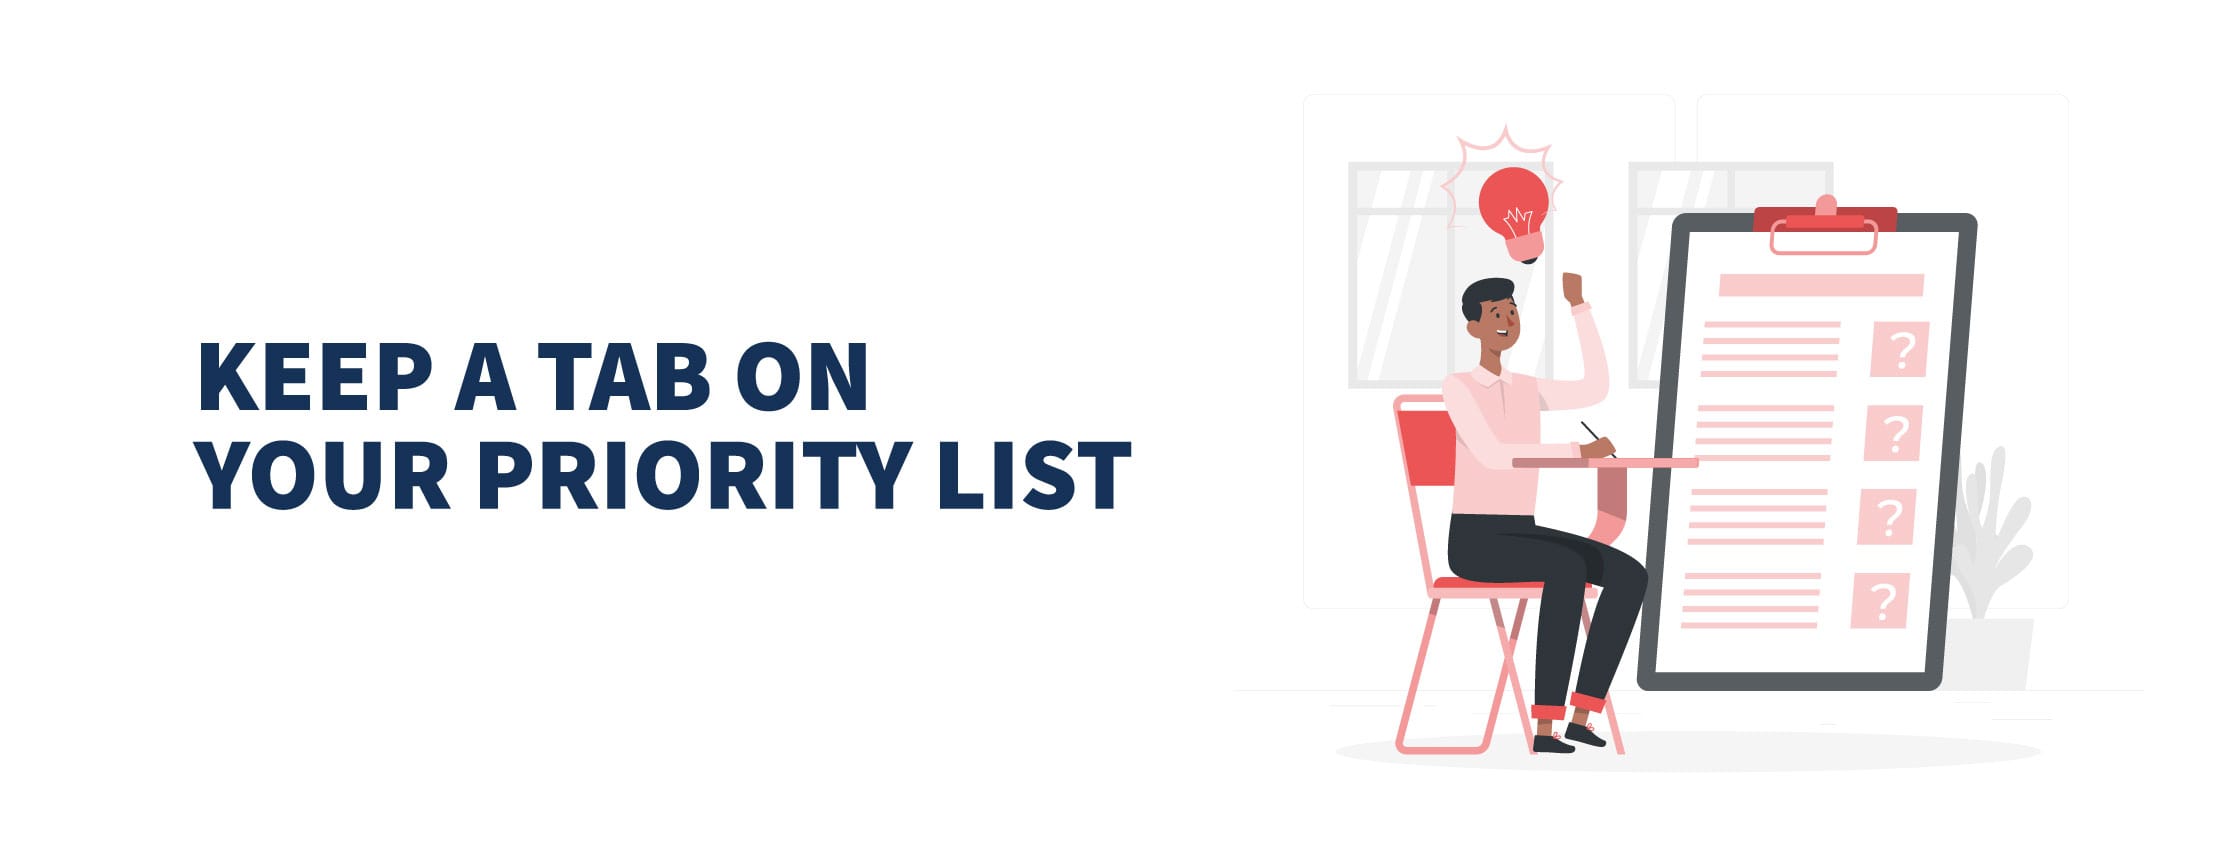 Keep a Tab on Your Priority List